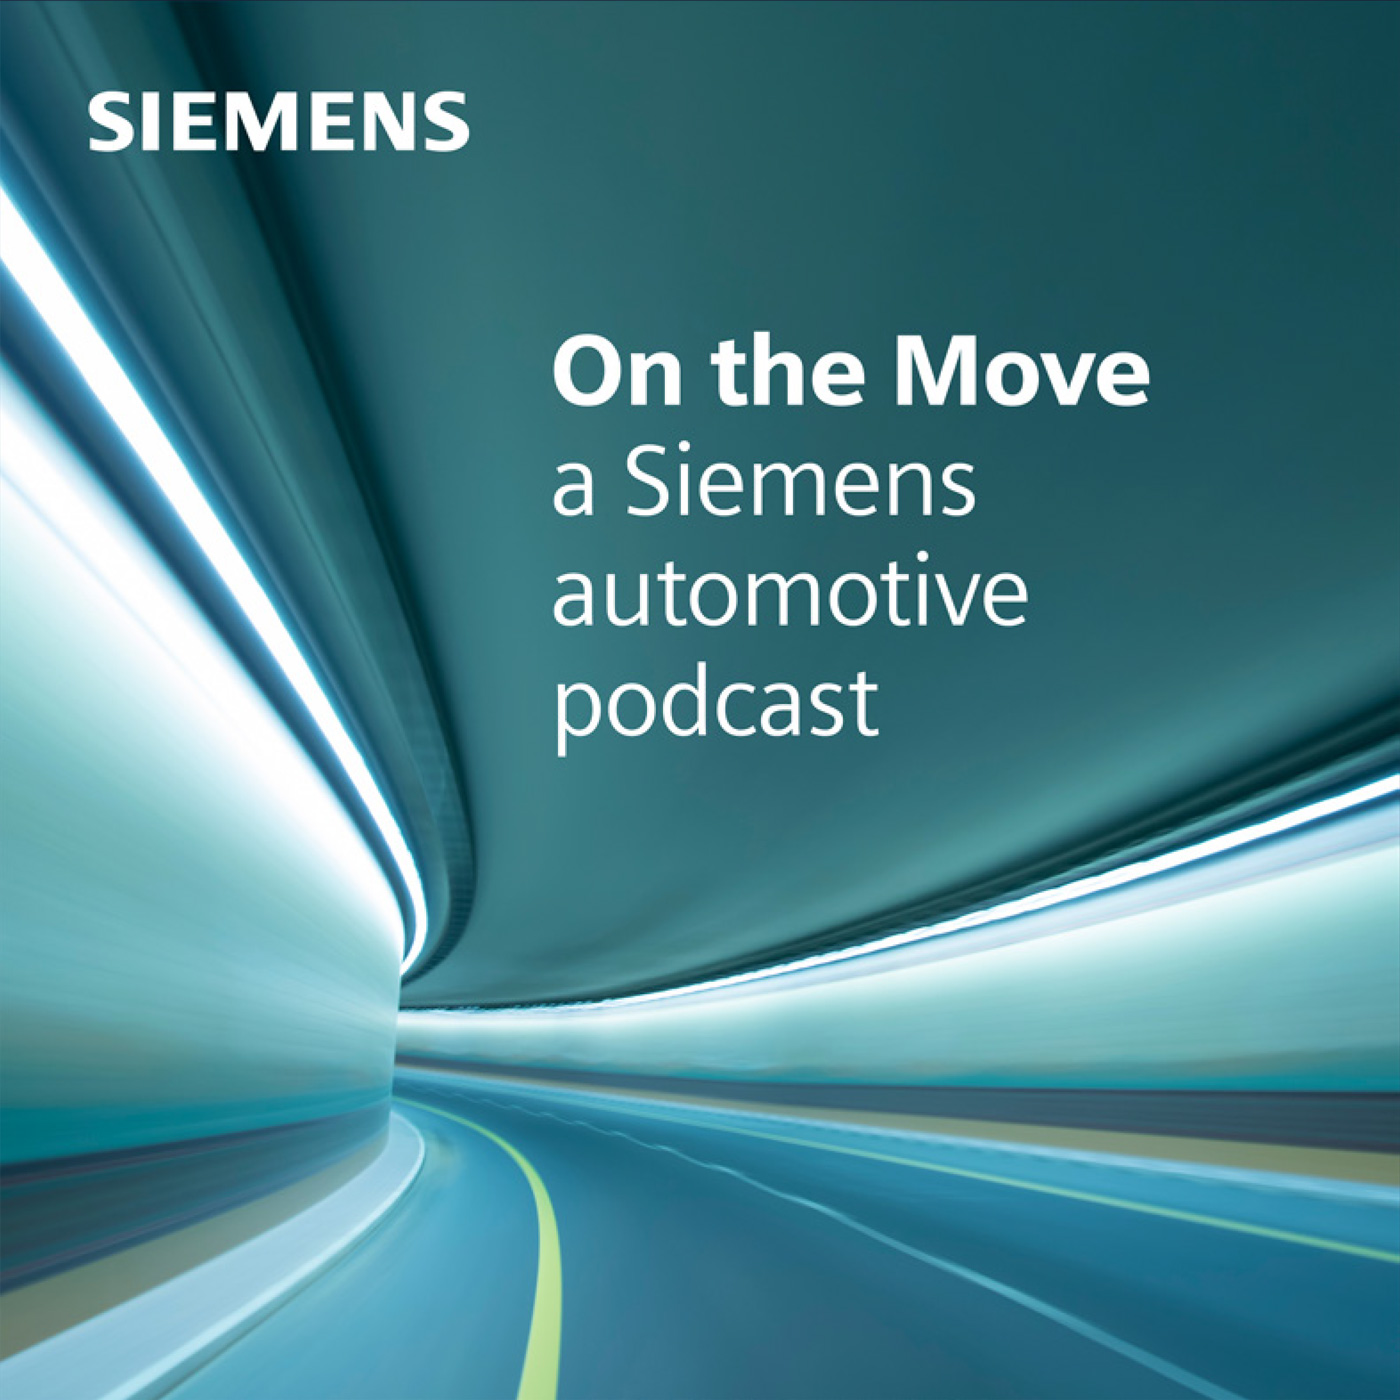 On the Move: A Siemens Automotive Podcast Podcast